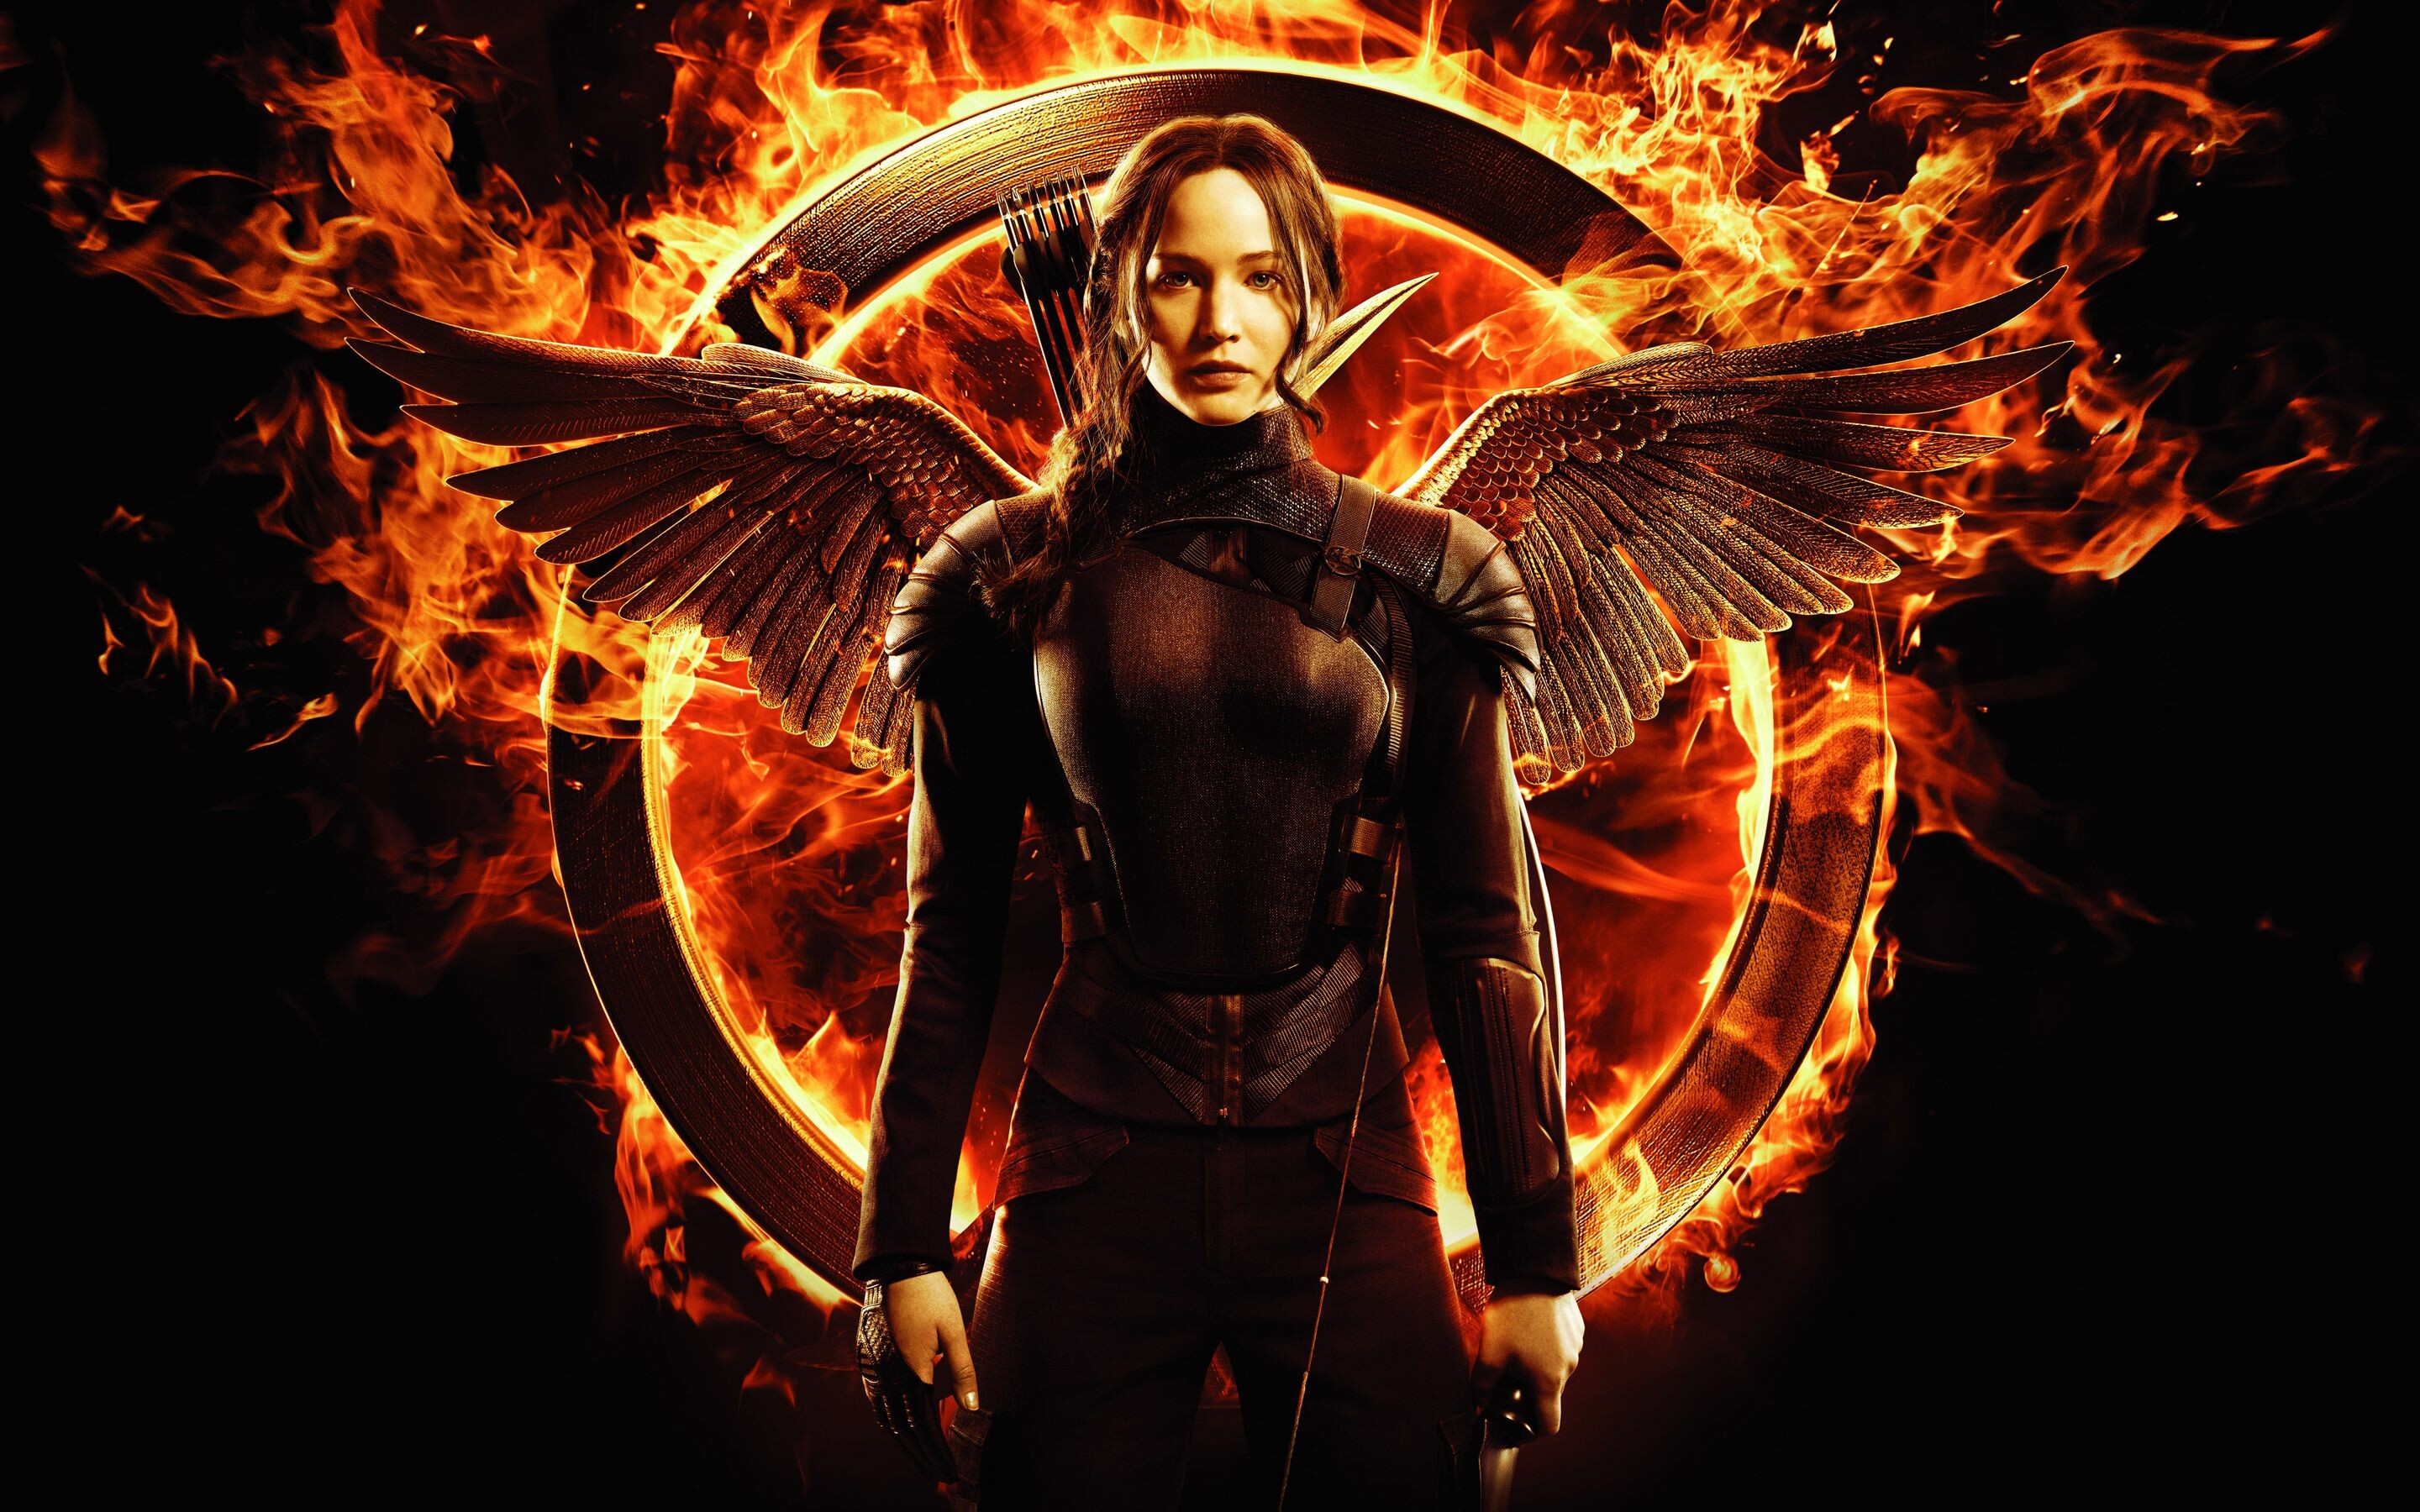 35+ The Hunger Games Wallpapers: HD, 4K, 5K for PC and Mobile | Download  free images for iPhone, Android